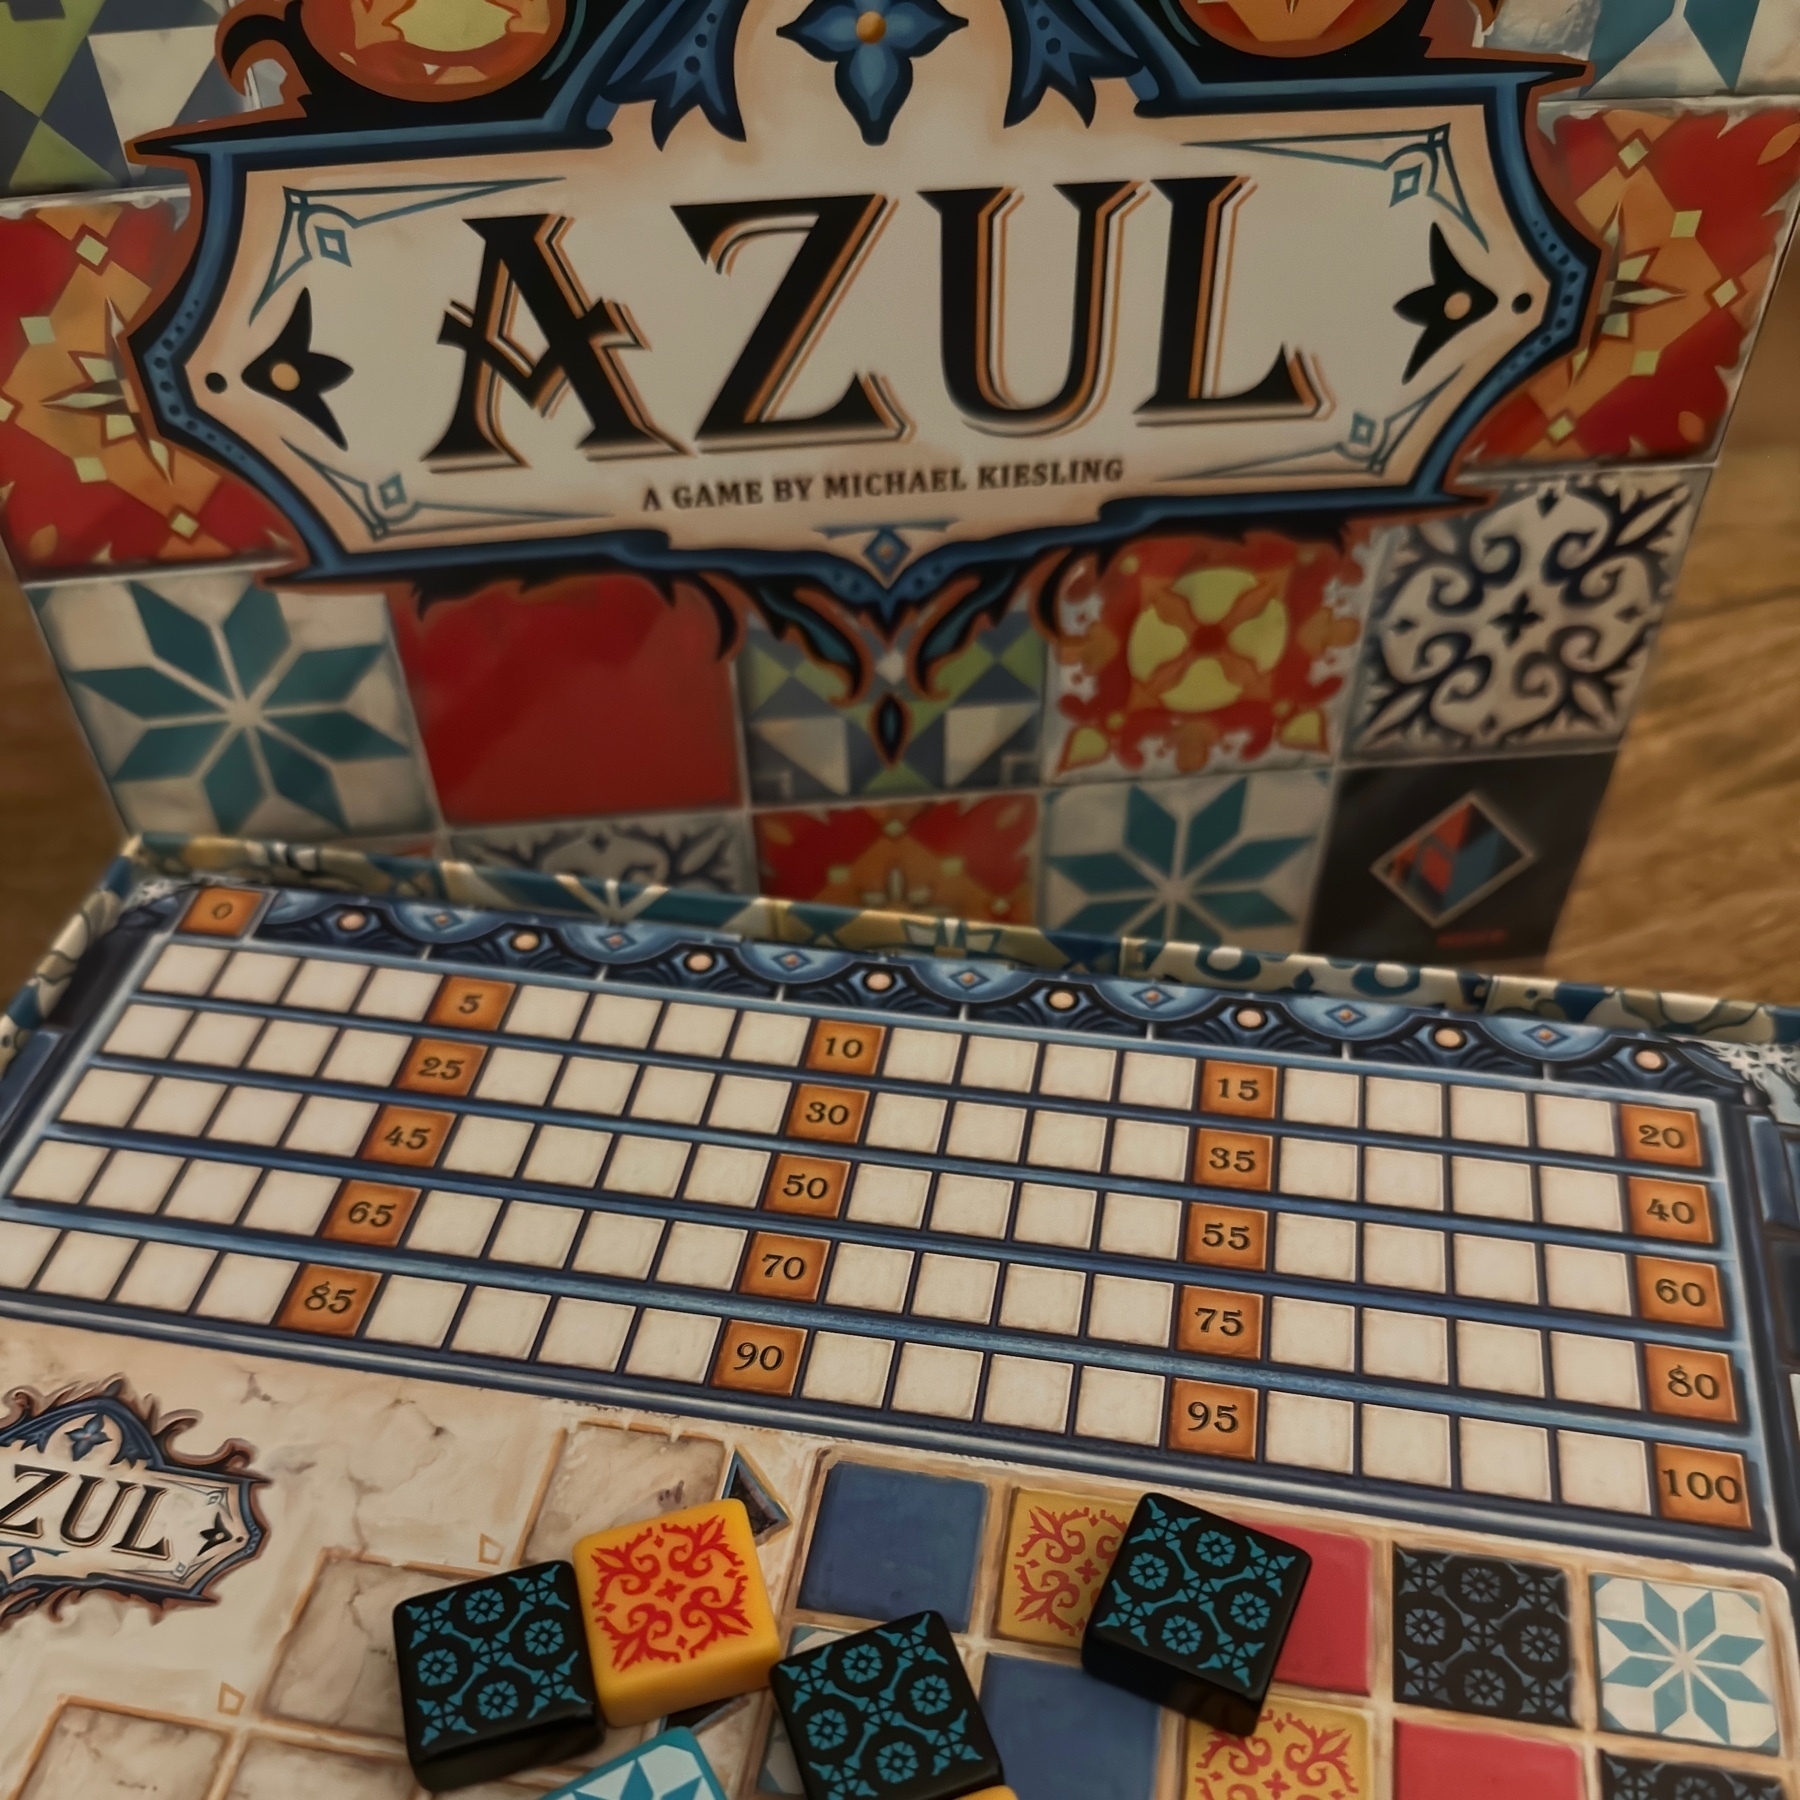 tiles from the boardgame Azul in front of the game's box